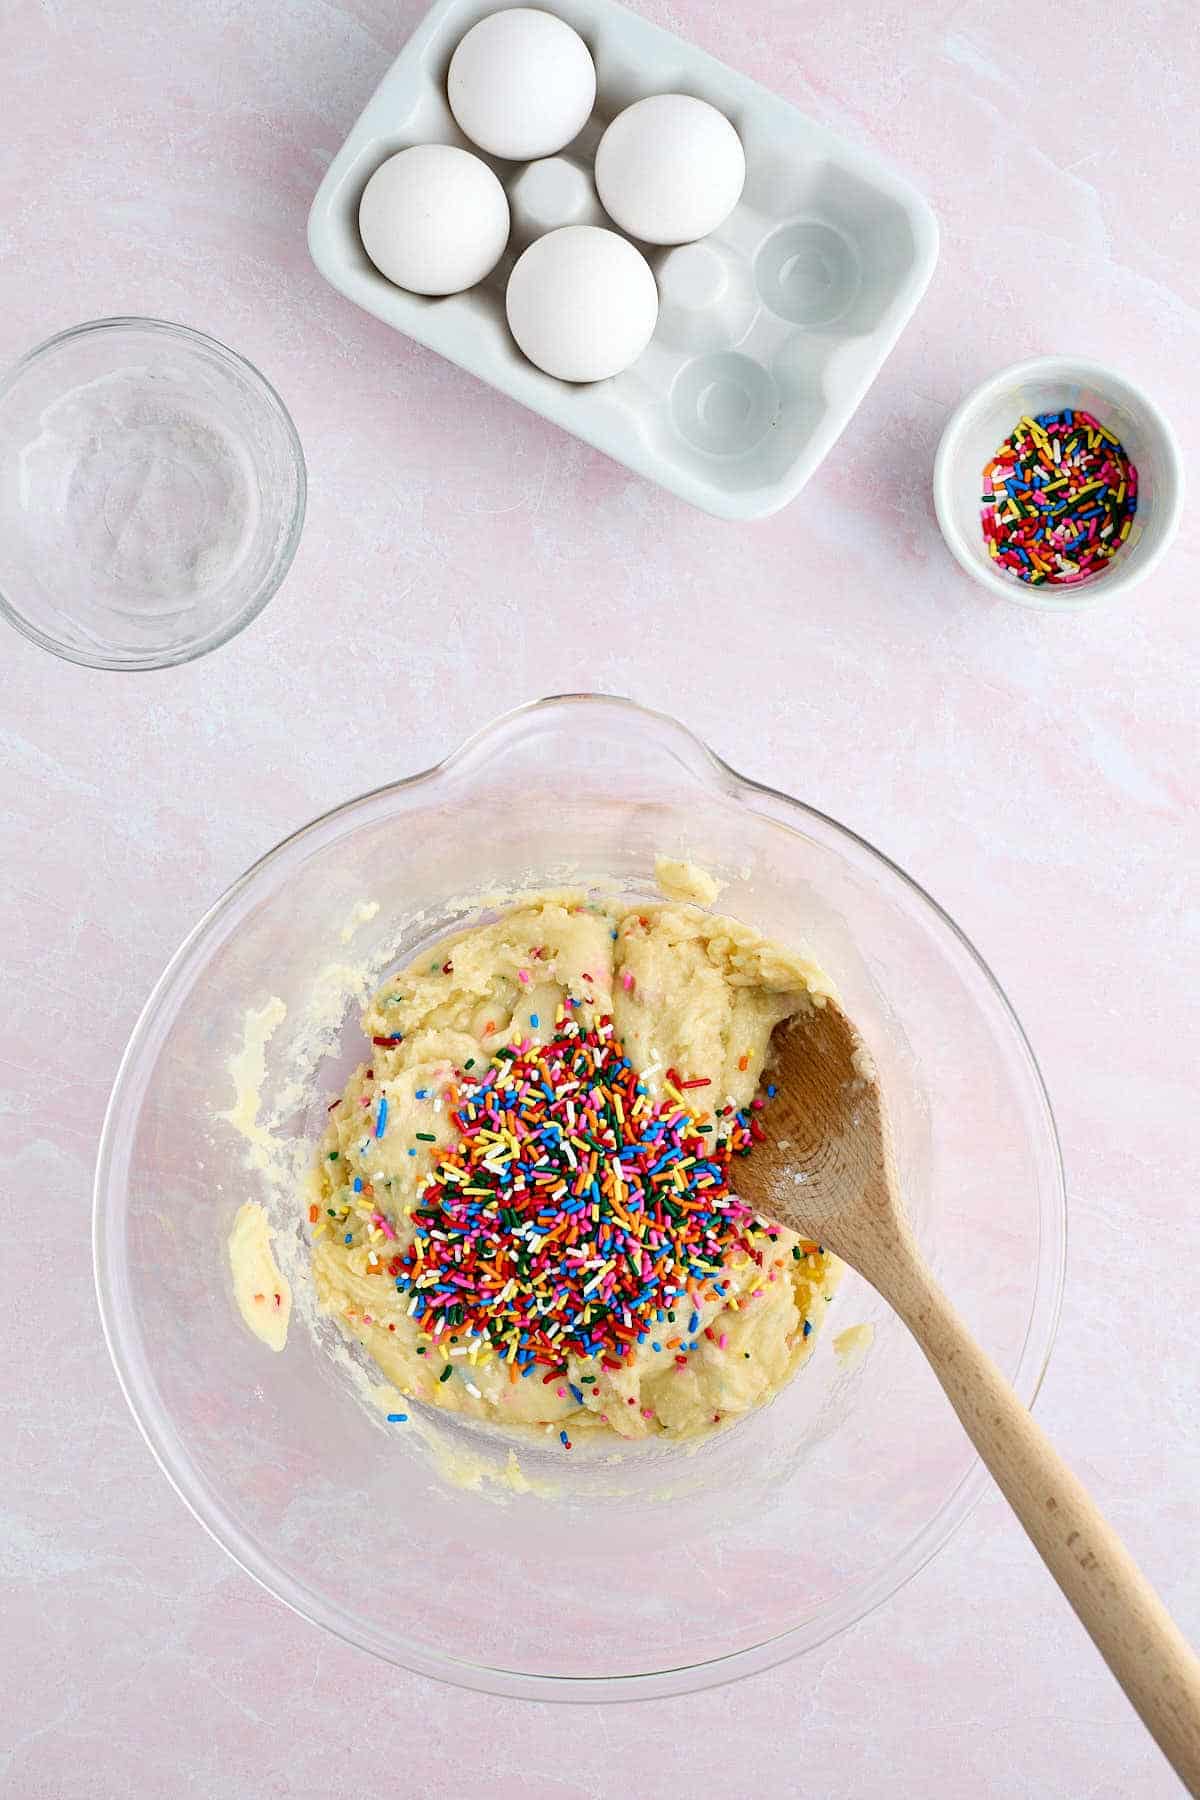 Extra sprinkles added to Funfetti cookie dough.